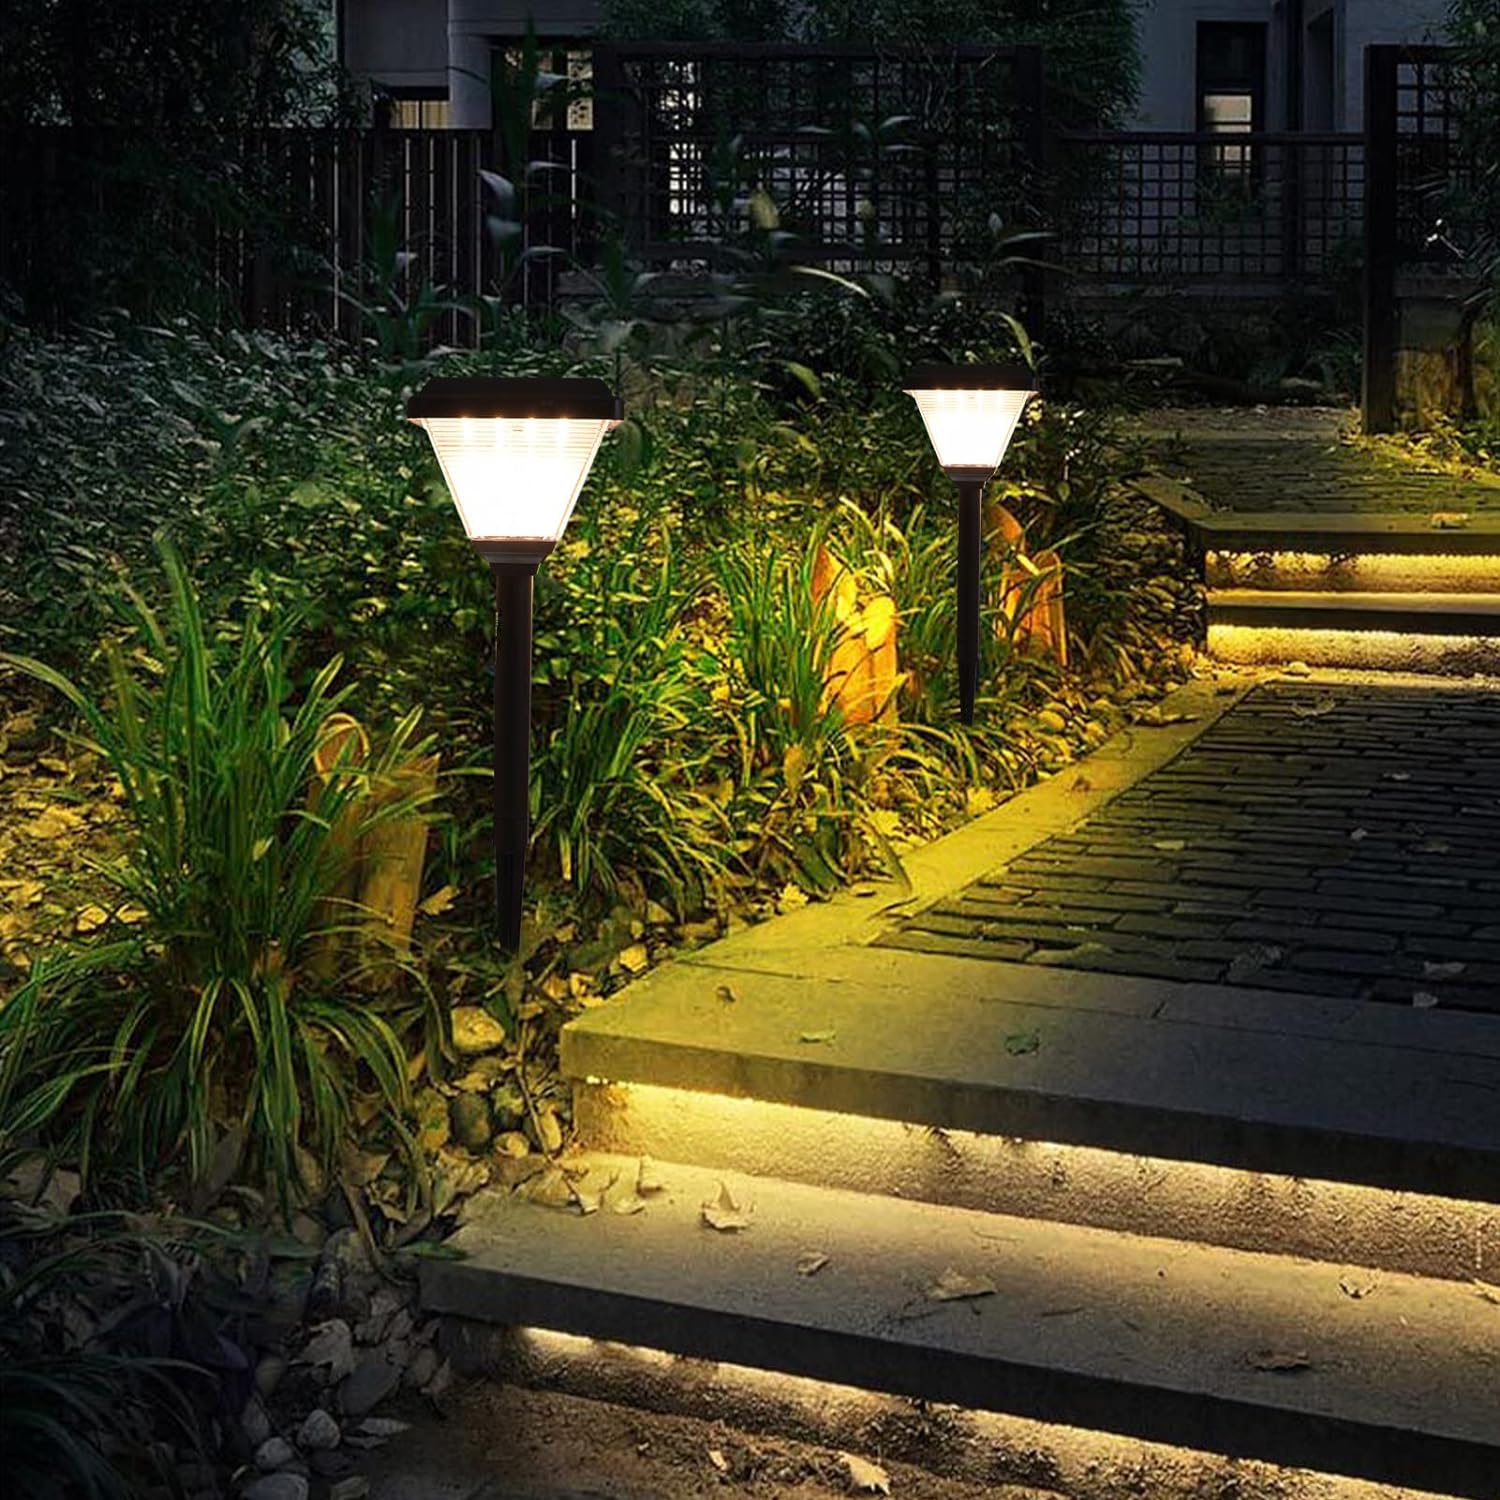 Buy Waterproof Aluminum LED Garden Lawn Solar Pole Light 7W - SG-2 | Shop at Supply Master Accra, Ghana Lamps & Lightings Buy Tools hardware Building materials